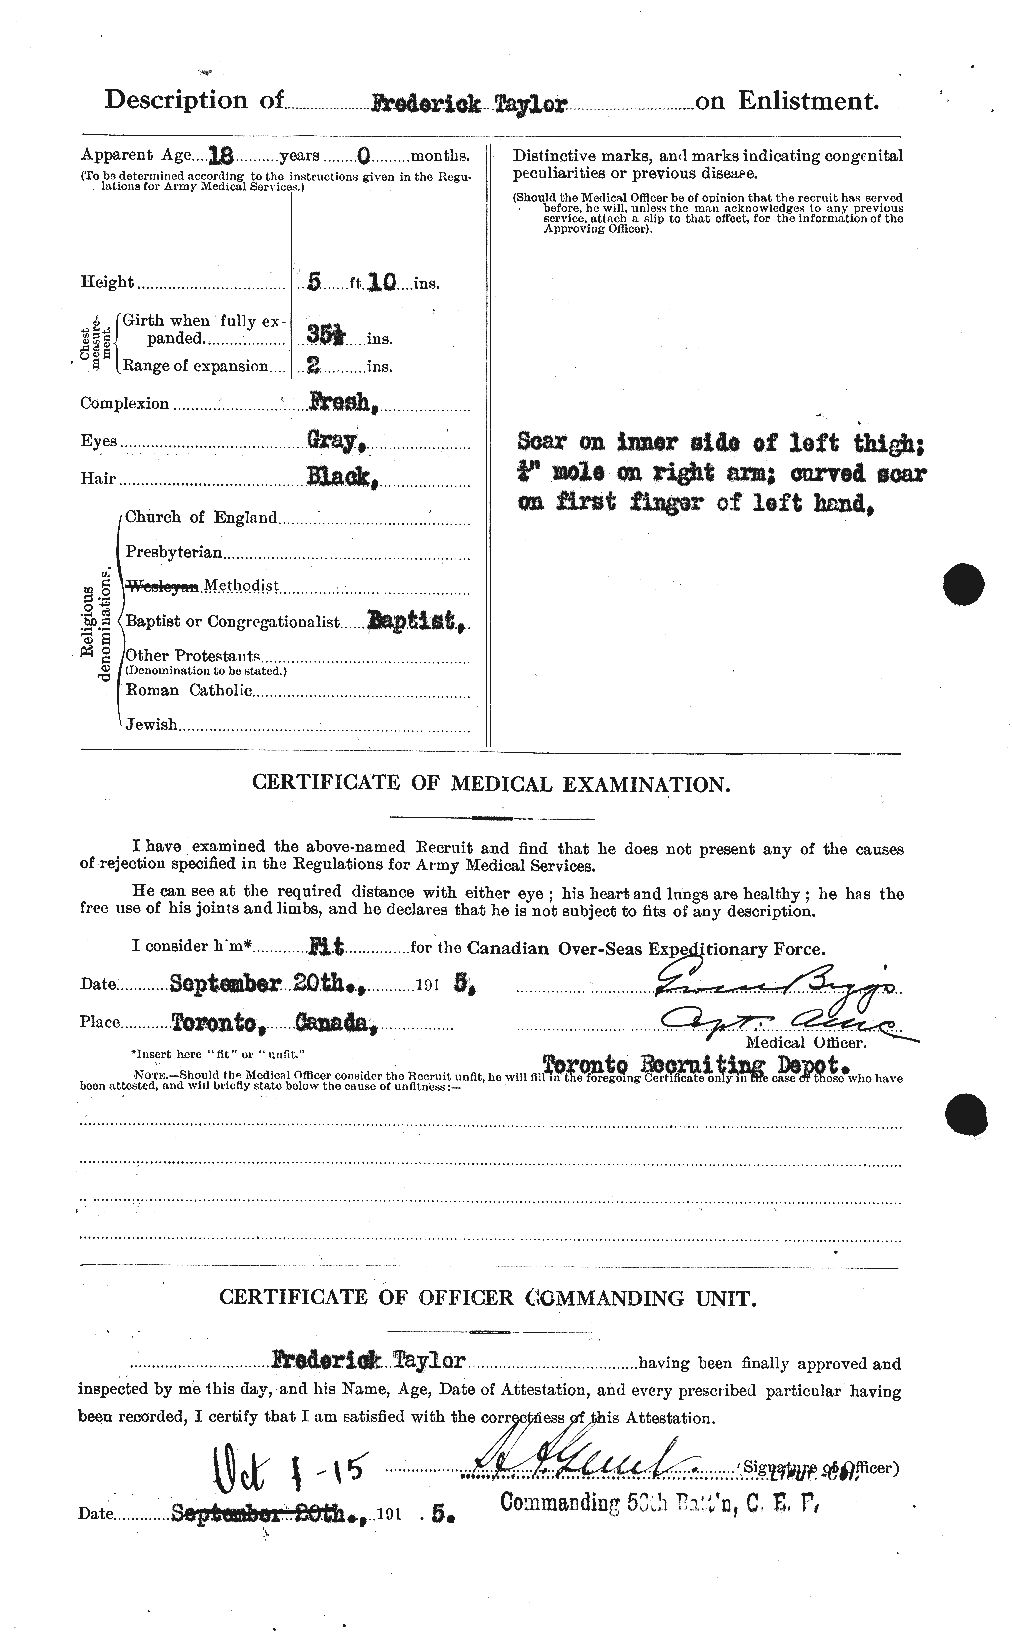 Personnel Records of the First World War - CEF 625776b